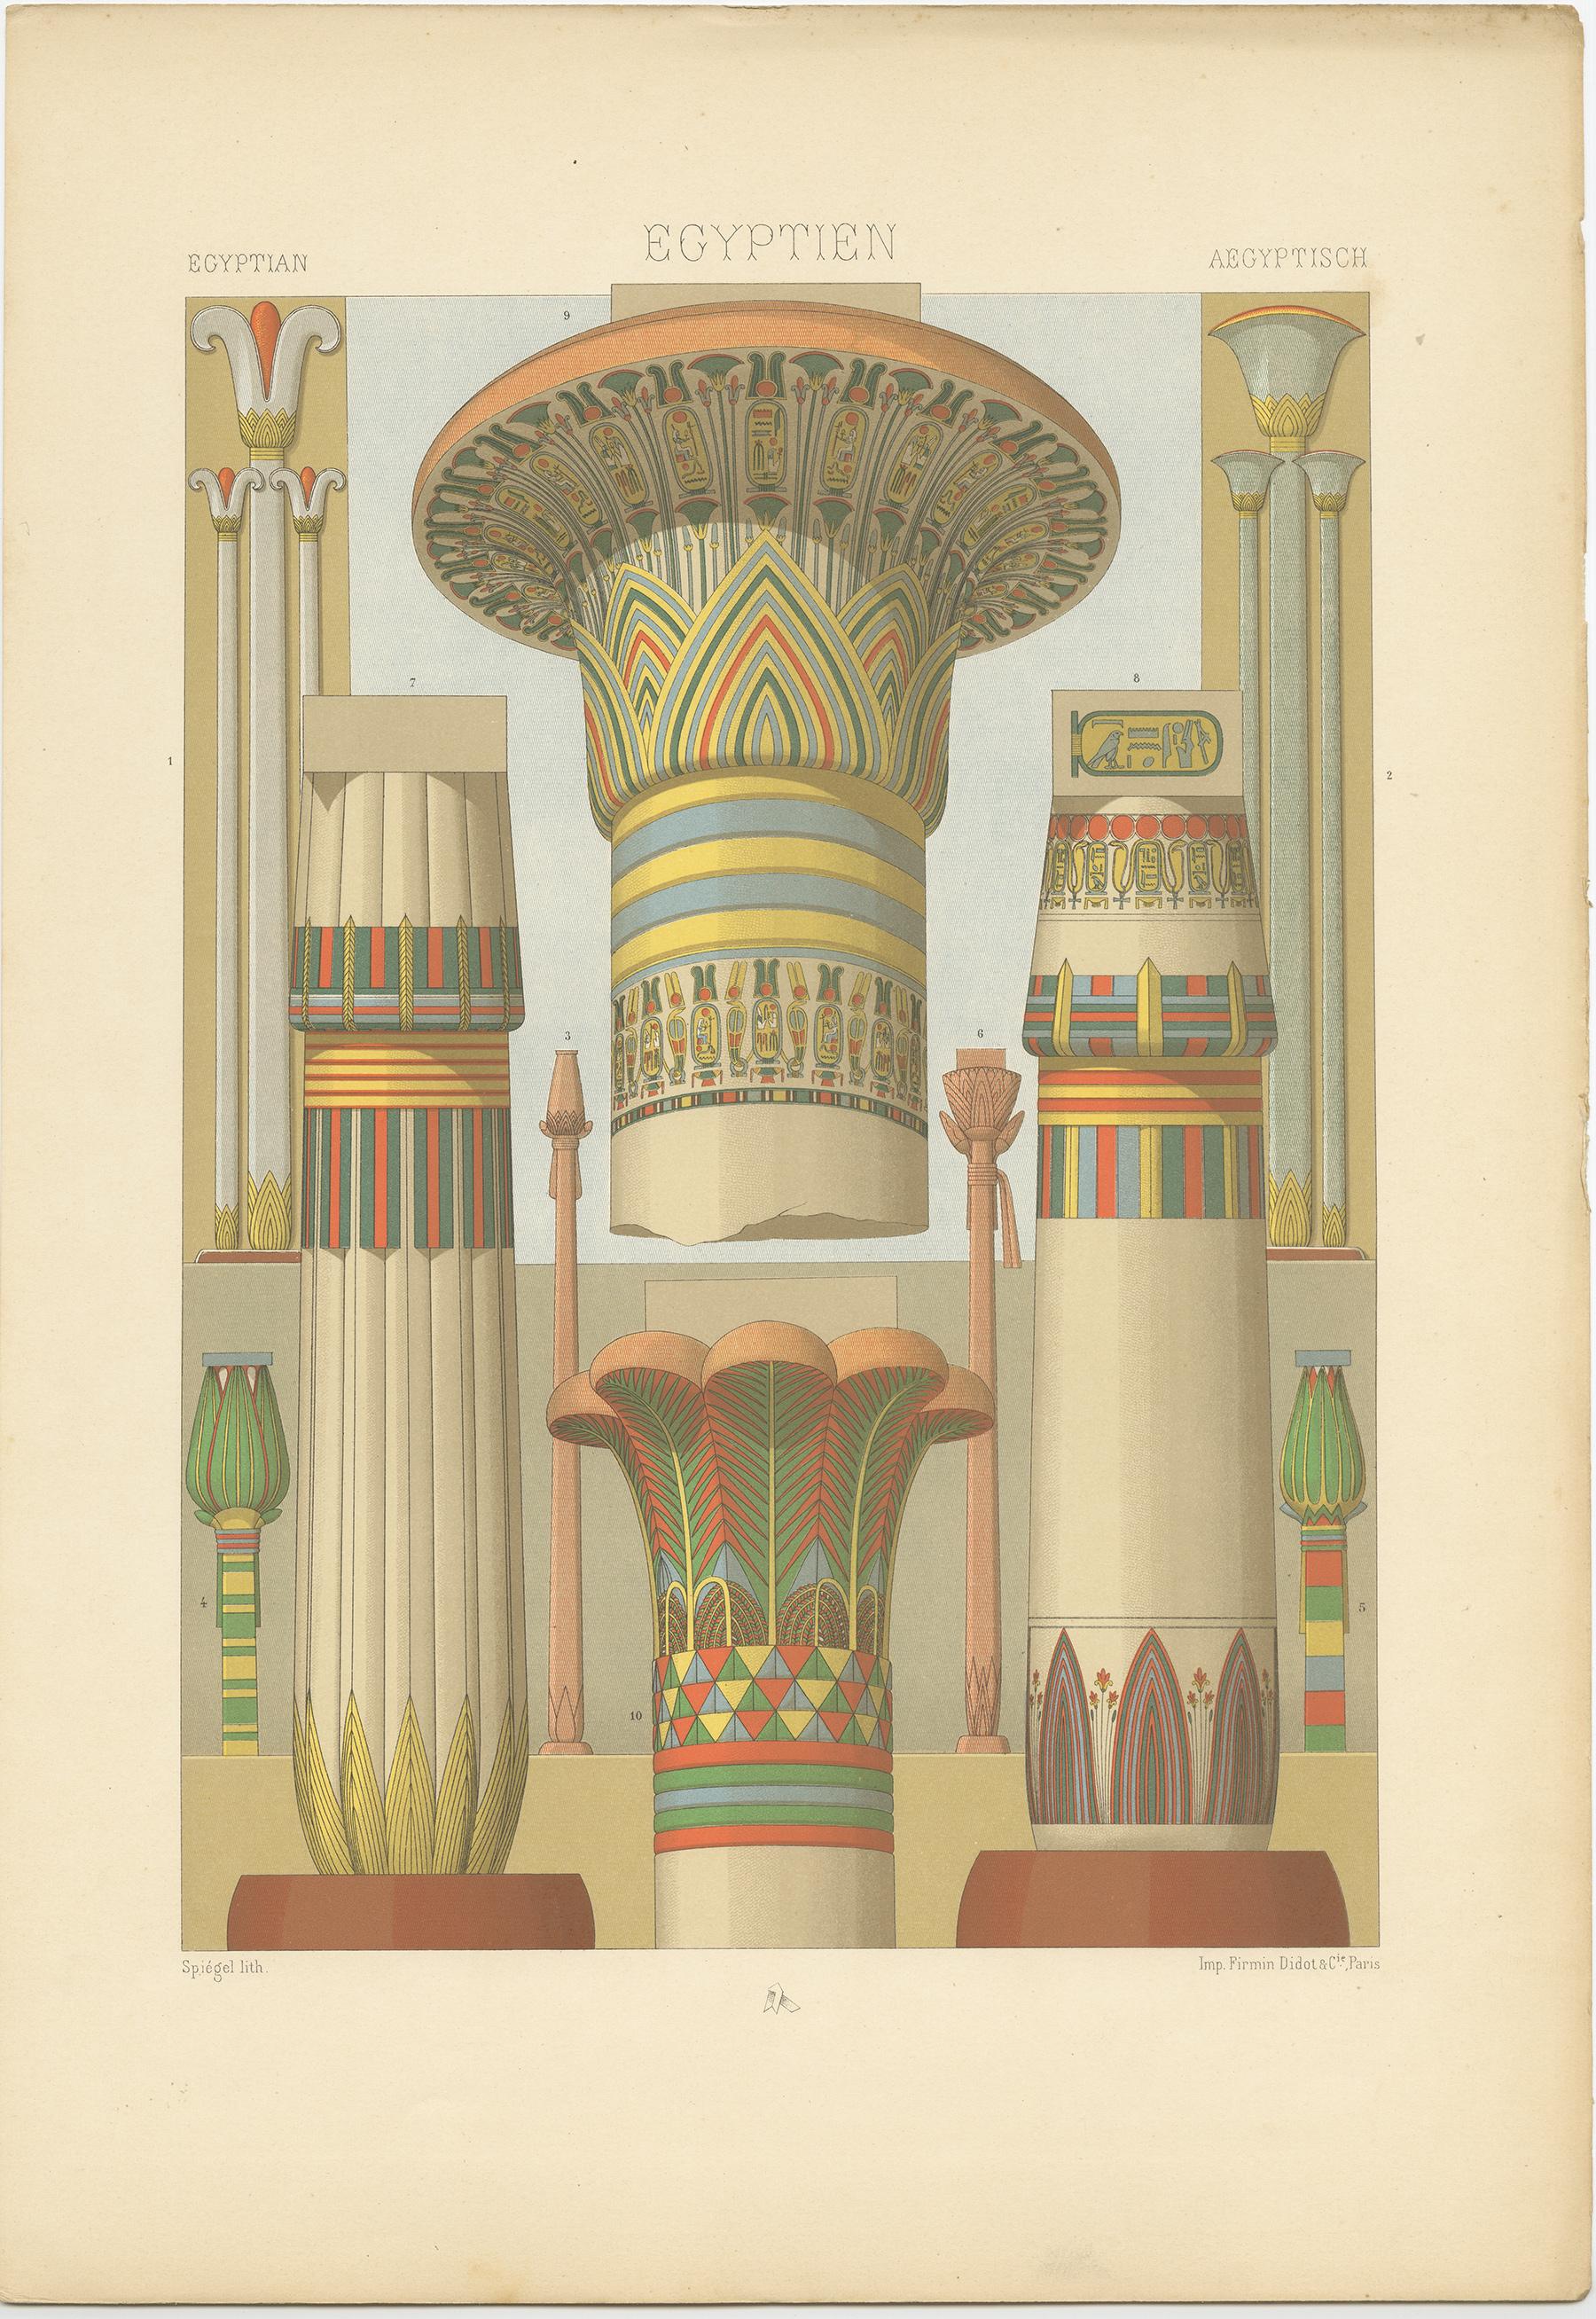 Antique print titled 'Egyptian - Egyptien - Aegyptisch'. Chromolithograph of Egyptian columns and colonnettes with plant motifs ornaments. This print originates from 'l'Ornement Polychrome' by Auguste Racinet. Published circa 1890.